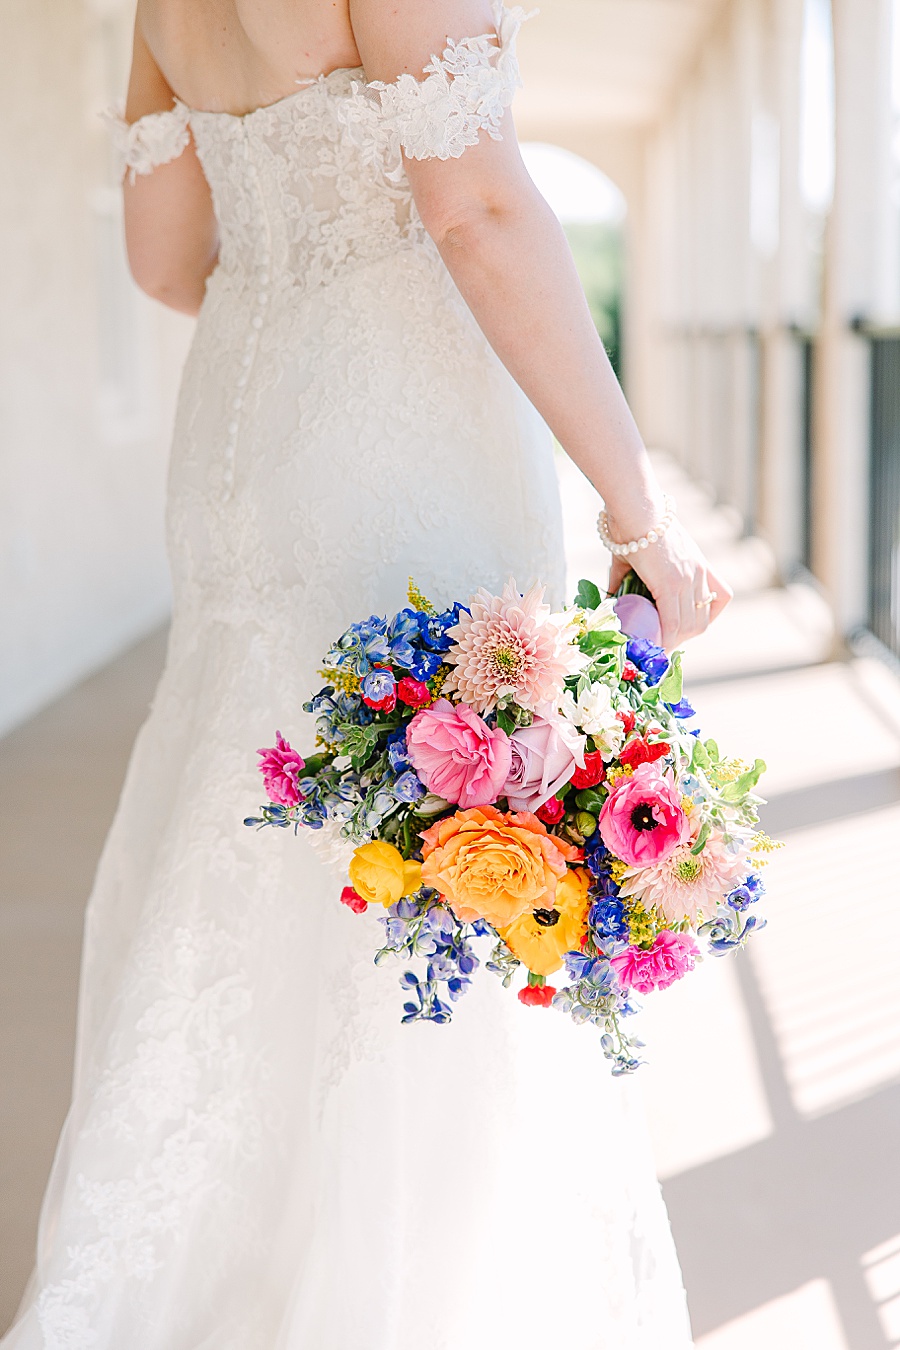 bride holding vibrant floral wedding bouquet on wedding day